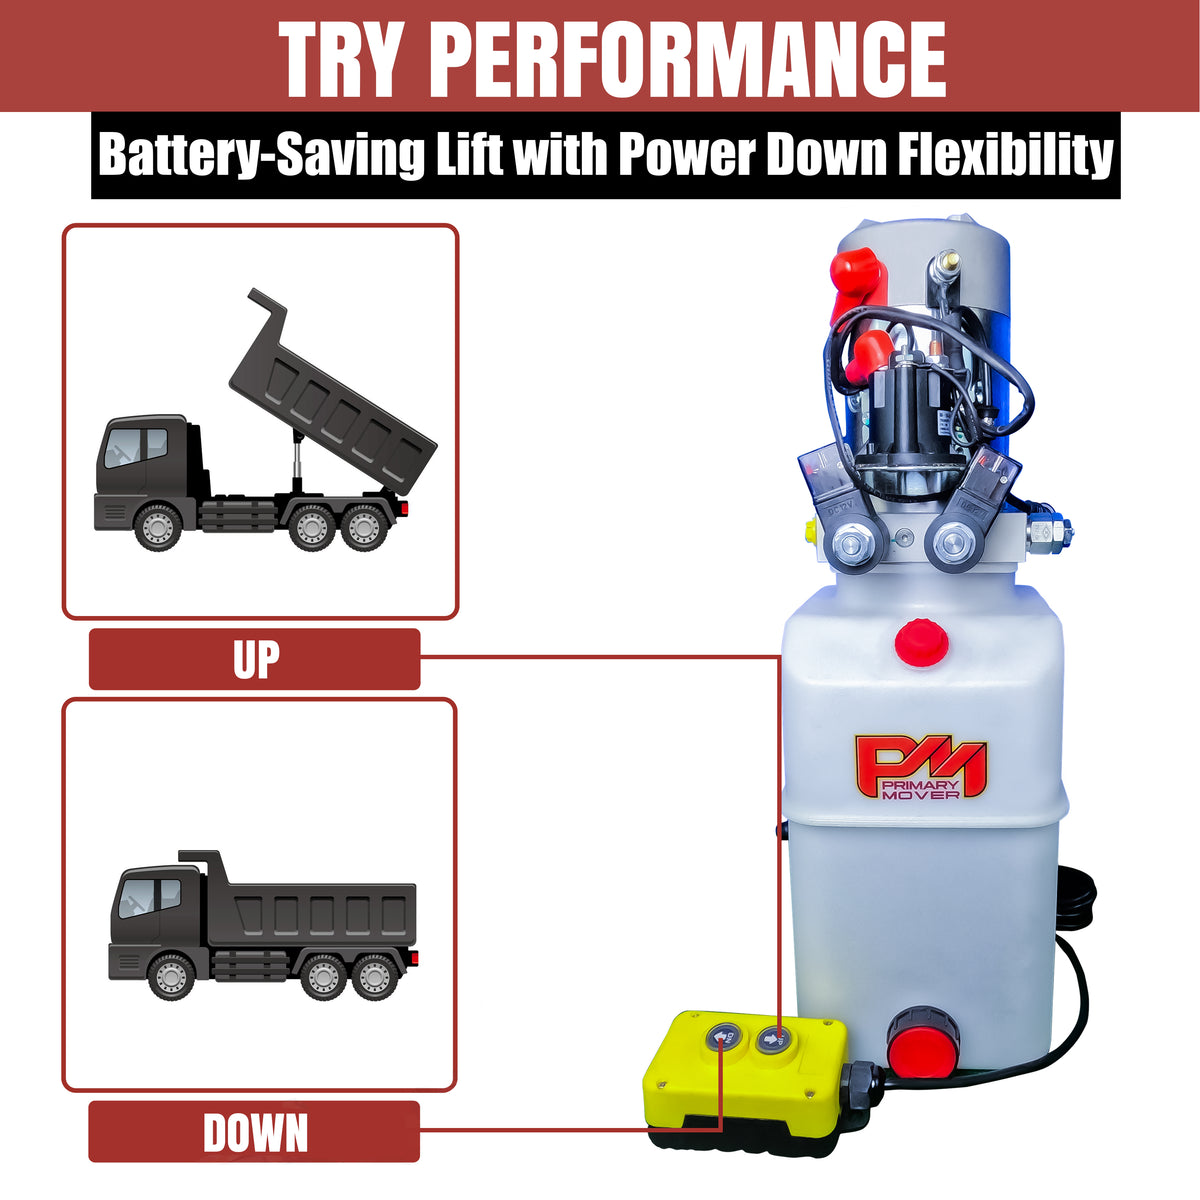 Primary Mover 12V Double-Acting Hydraulic Pump - Precision-engineered for hydraulic dump bed systems. Dual-acting functionality, quality craftsmanship, and cost-effective performance.